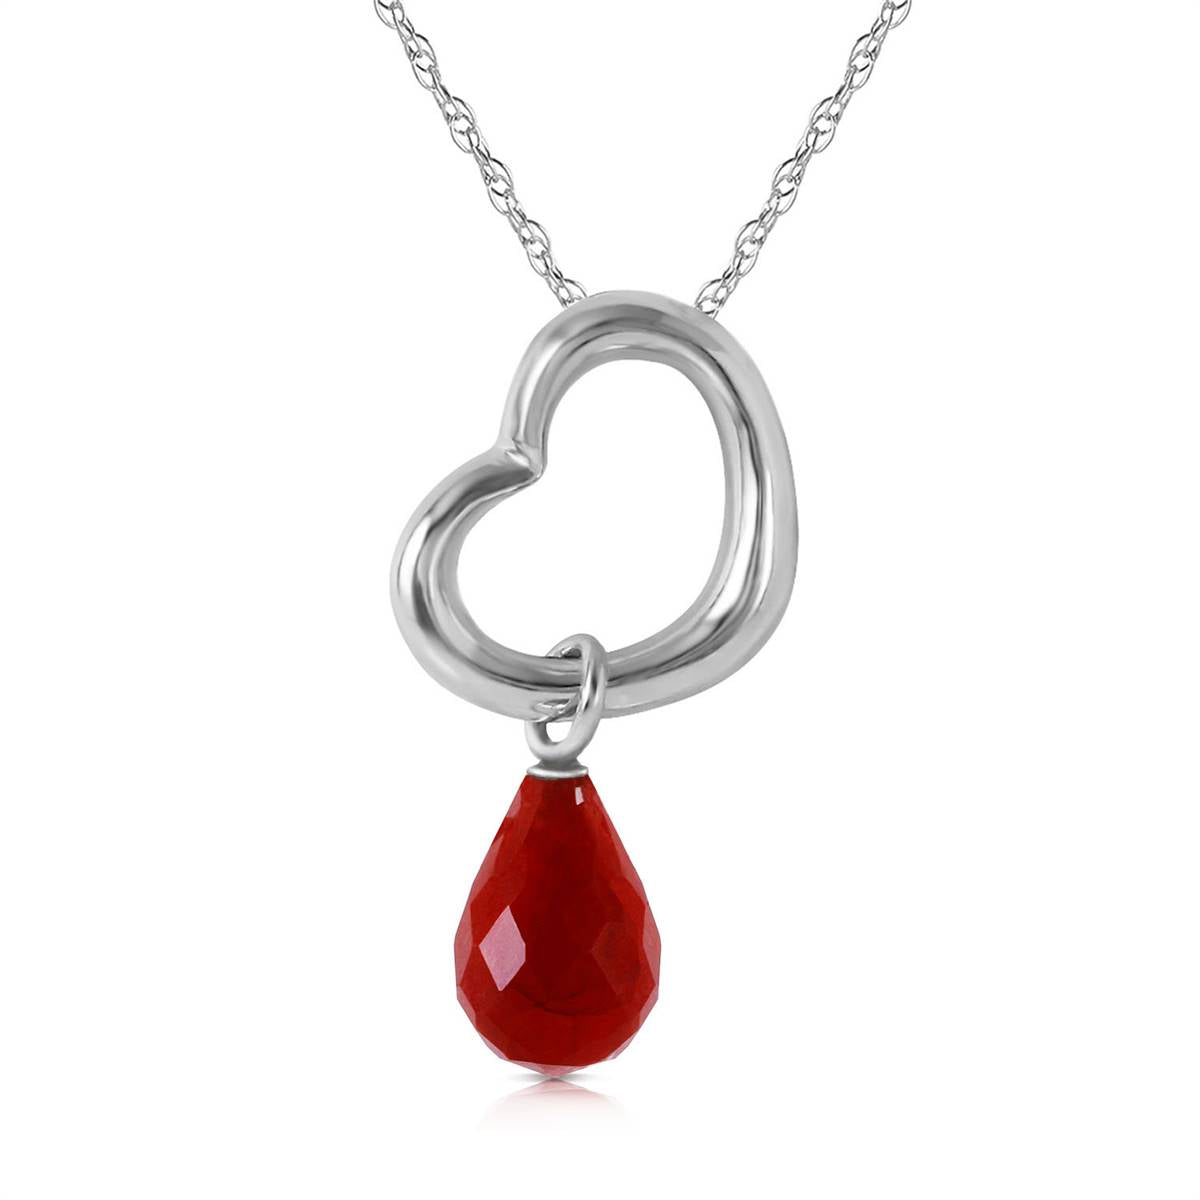 14K Solid White Gold Heart Necklace w/ Dangling Natural Ruby